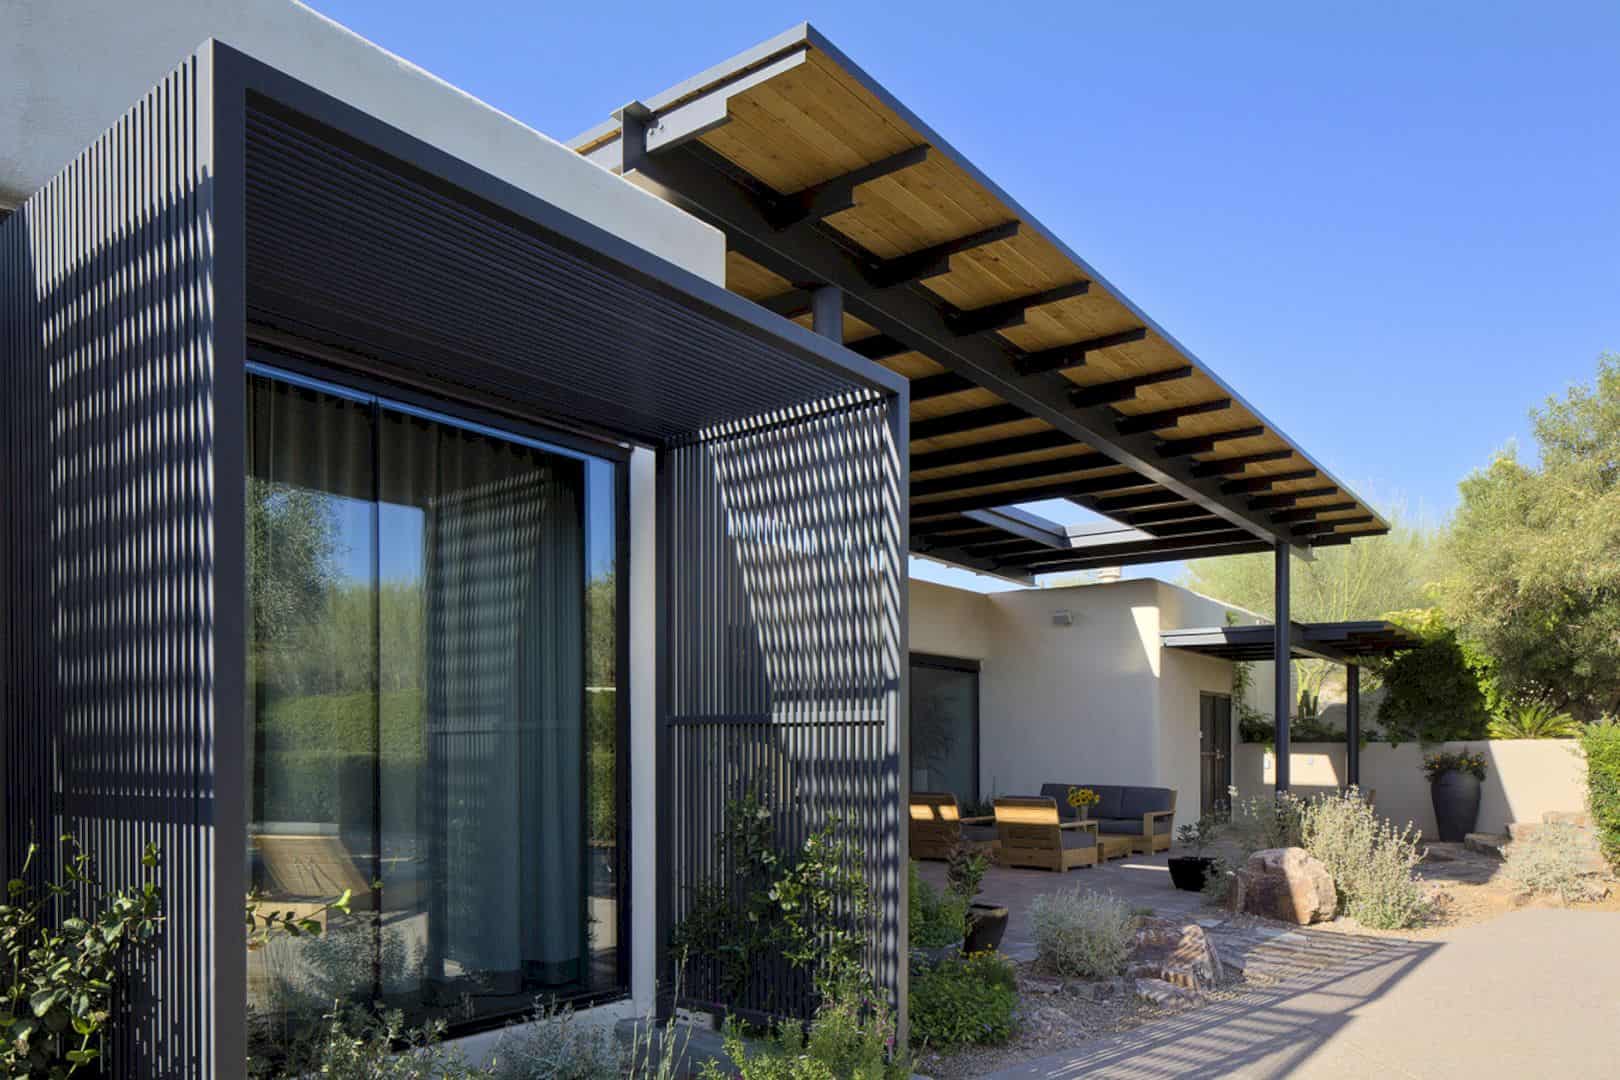 Canopy House Open Up Interior Spaces Embracing The Lush Landscape Of The Sonoran Desert 9